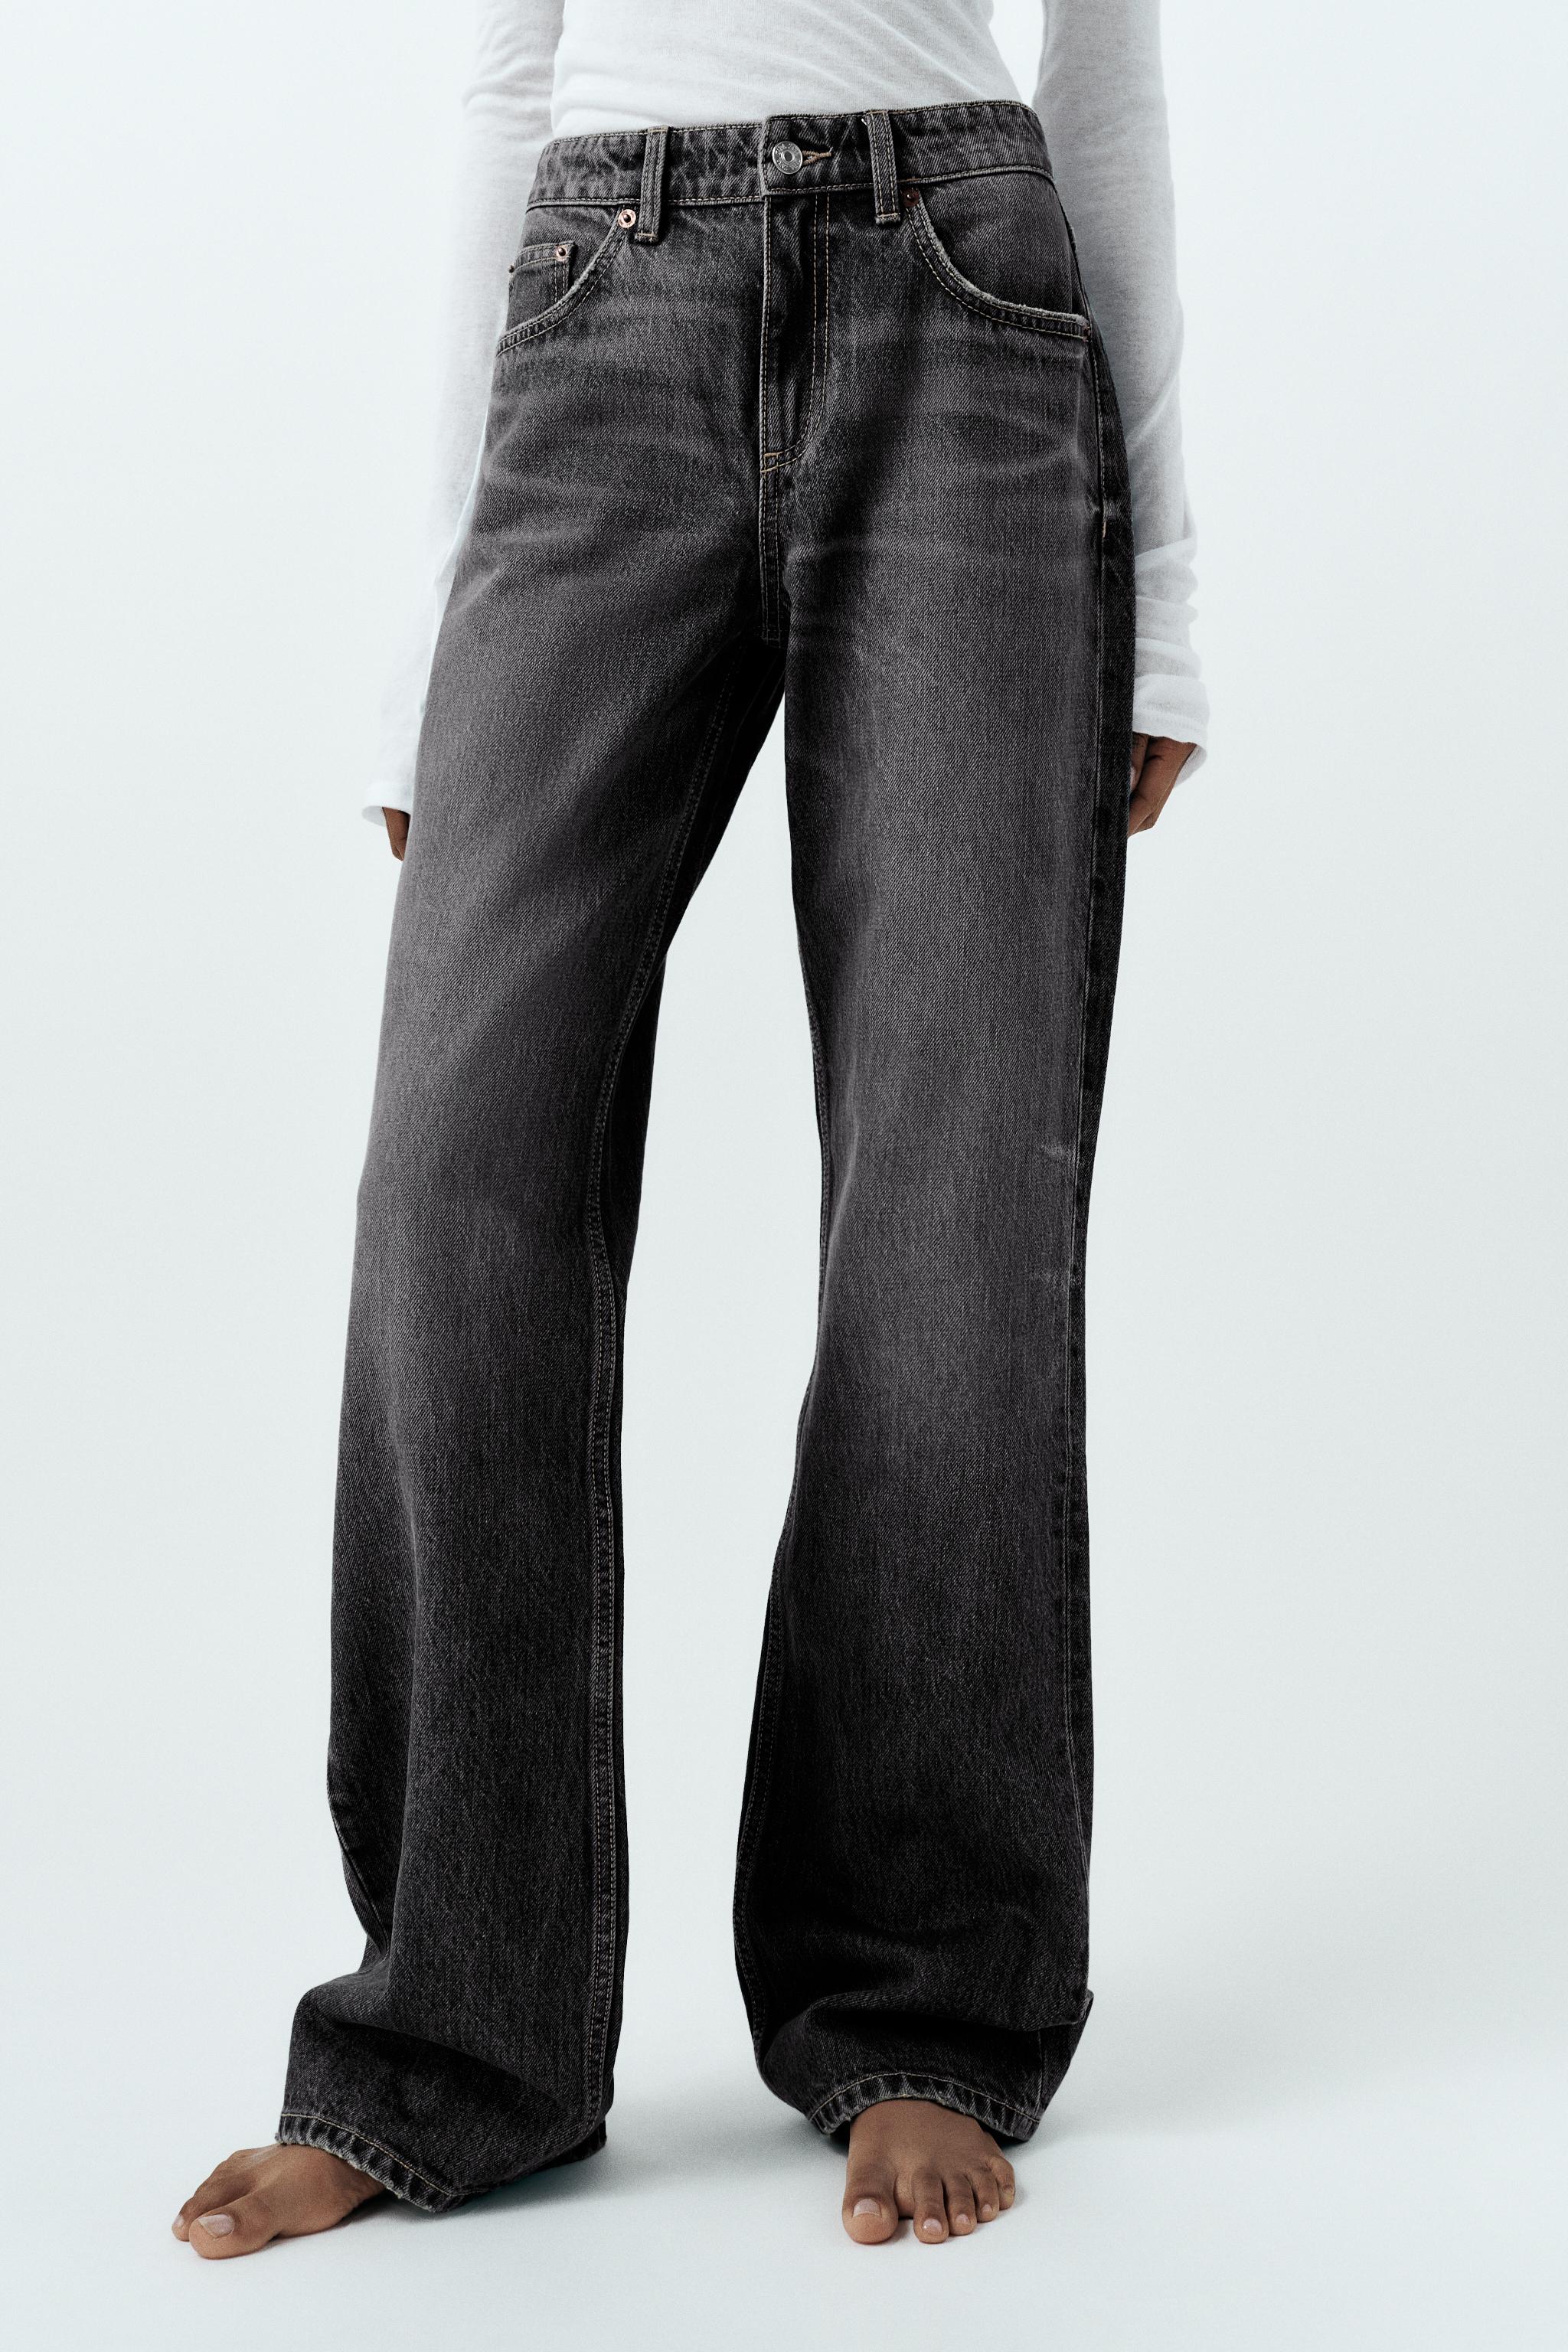 TRF LOW RISE STRAIGHT CUT JEANS - Anthracite grey | ZARA